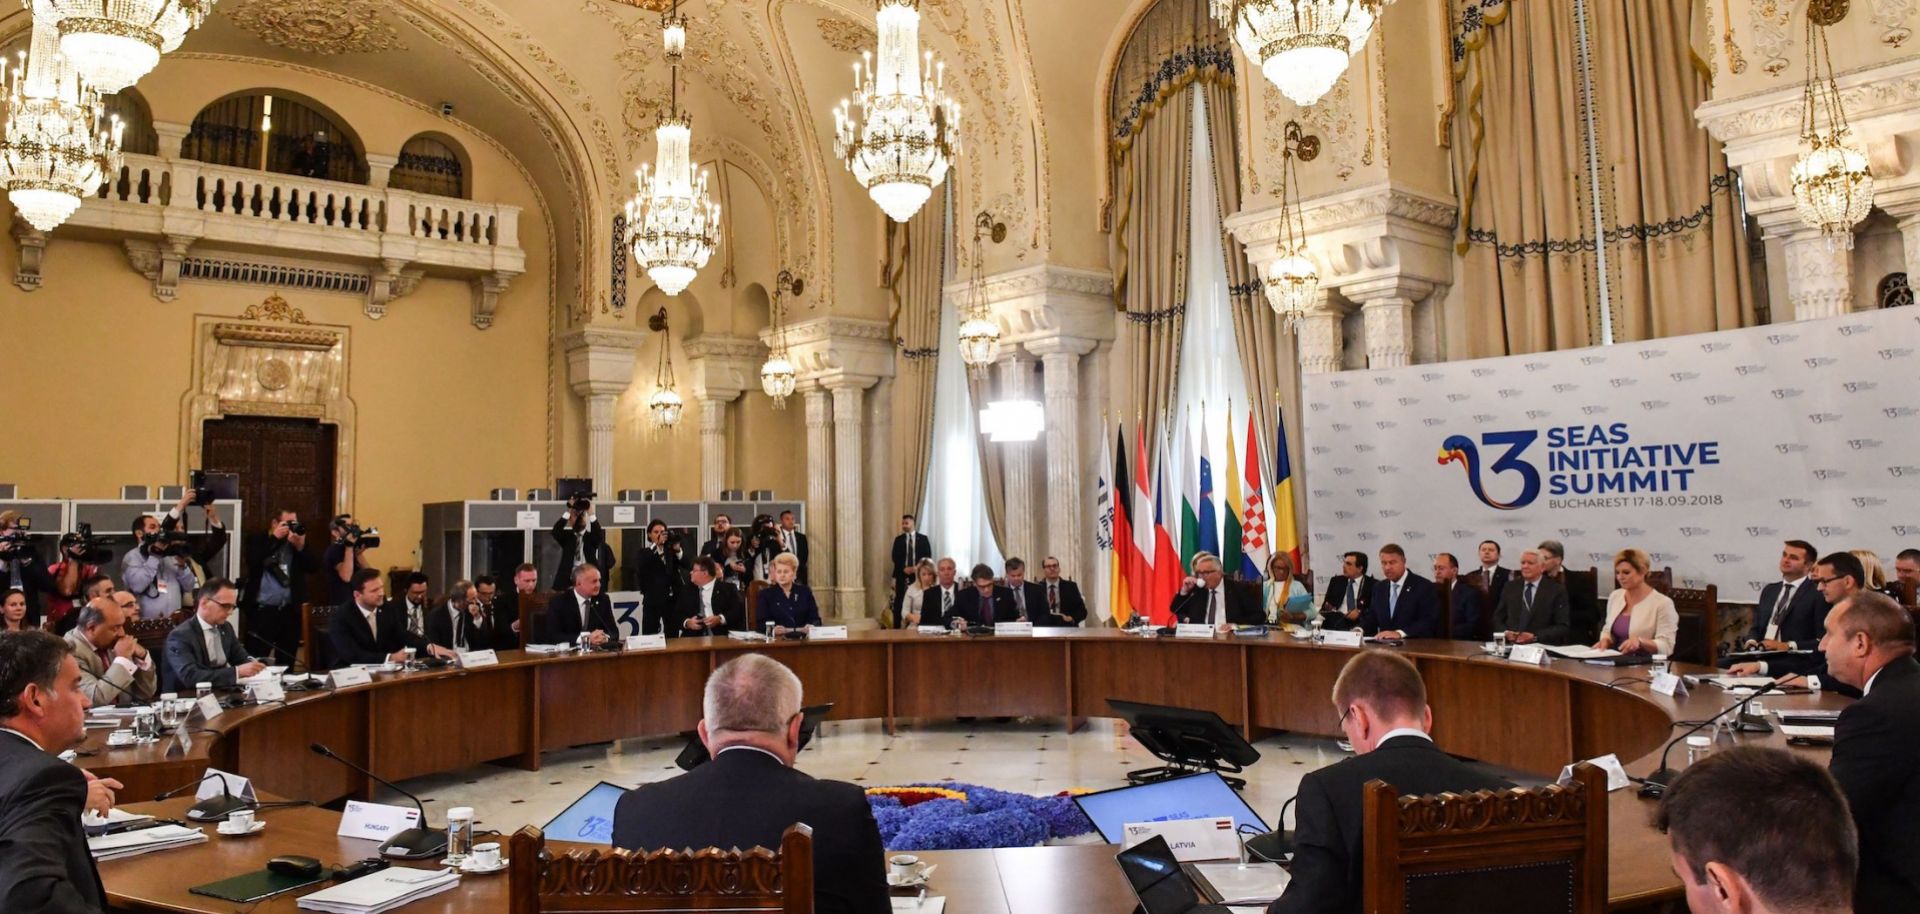 European Commission President Jean-Claude Juncker (center) and representatives of the Three Seas Initiative take part in a summit on Sept. 18 in Romania.